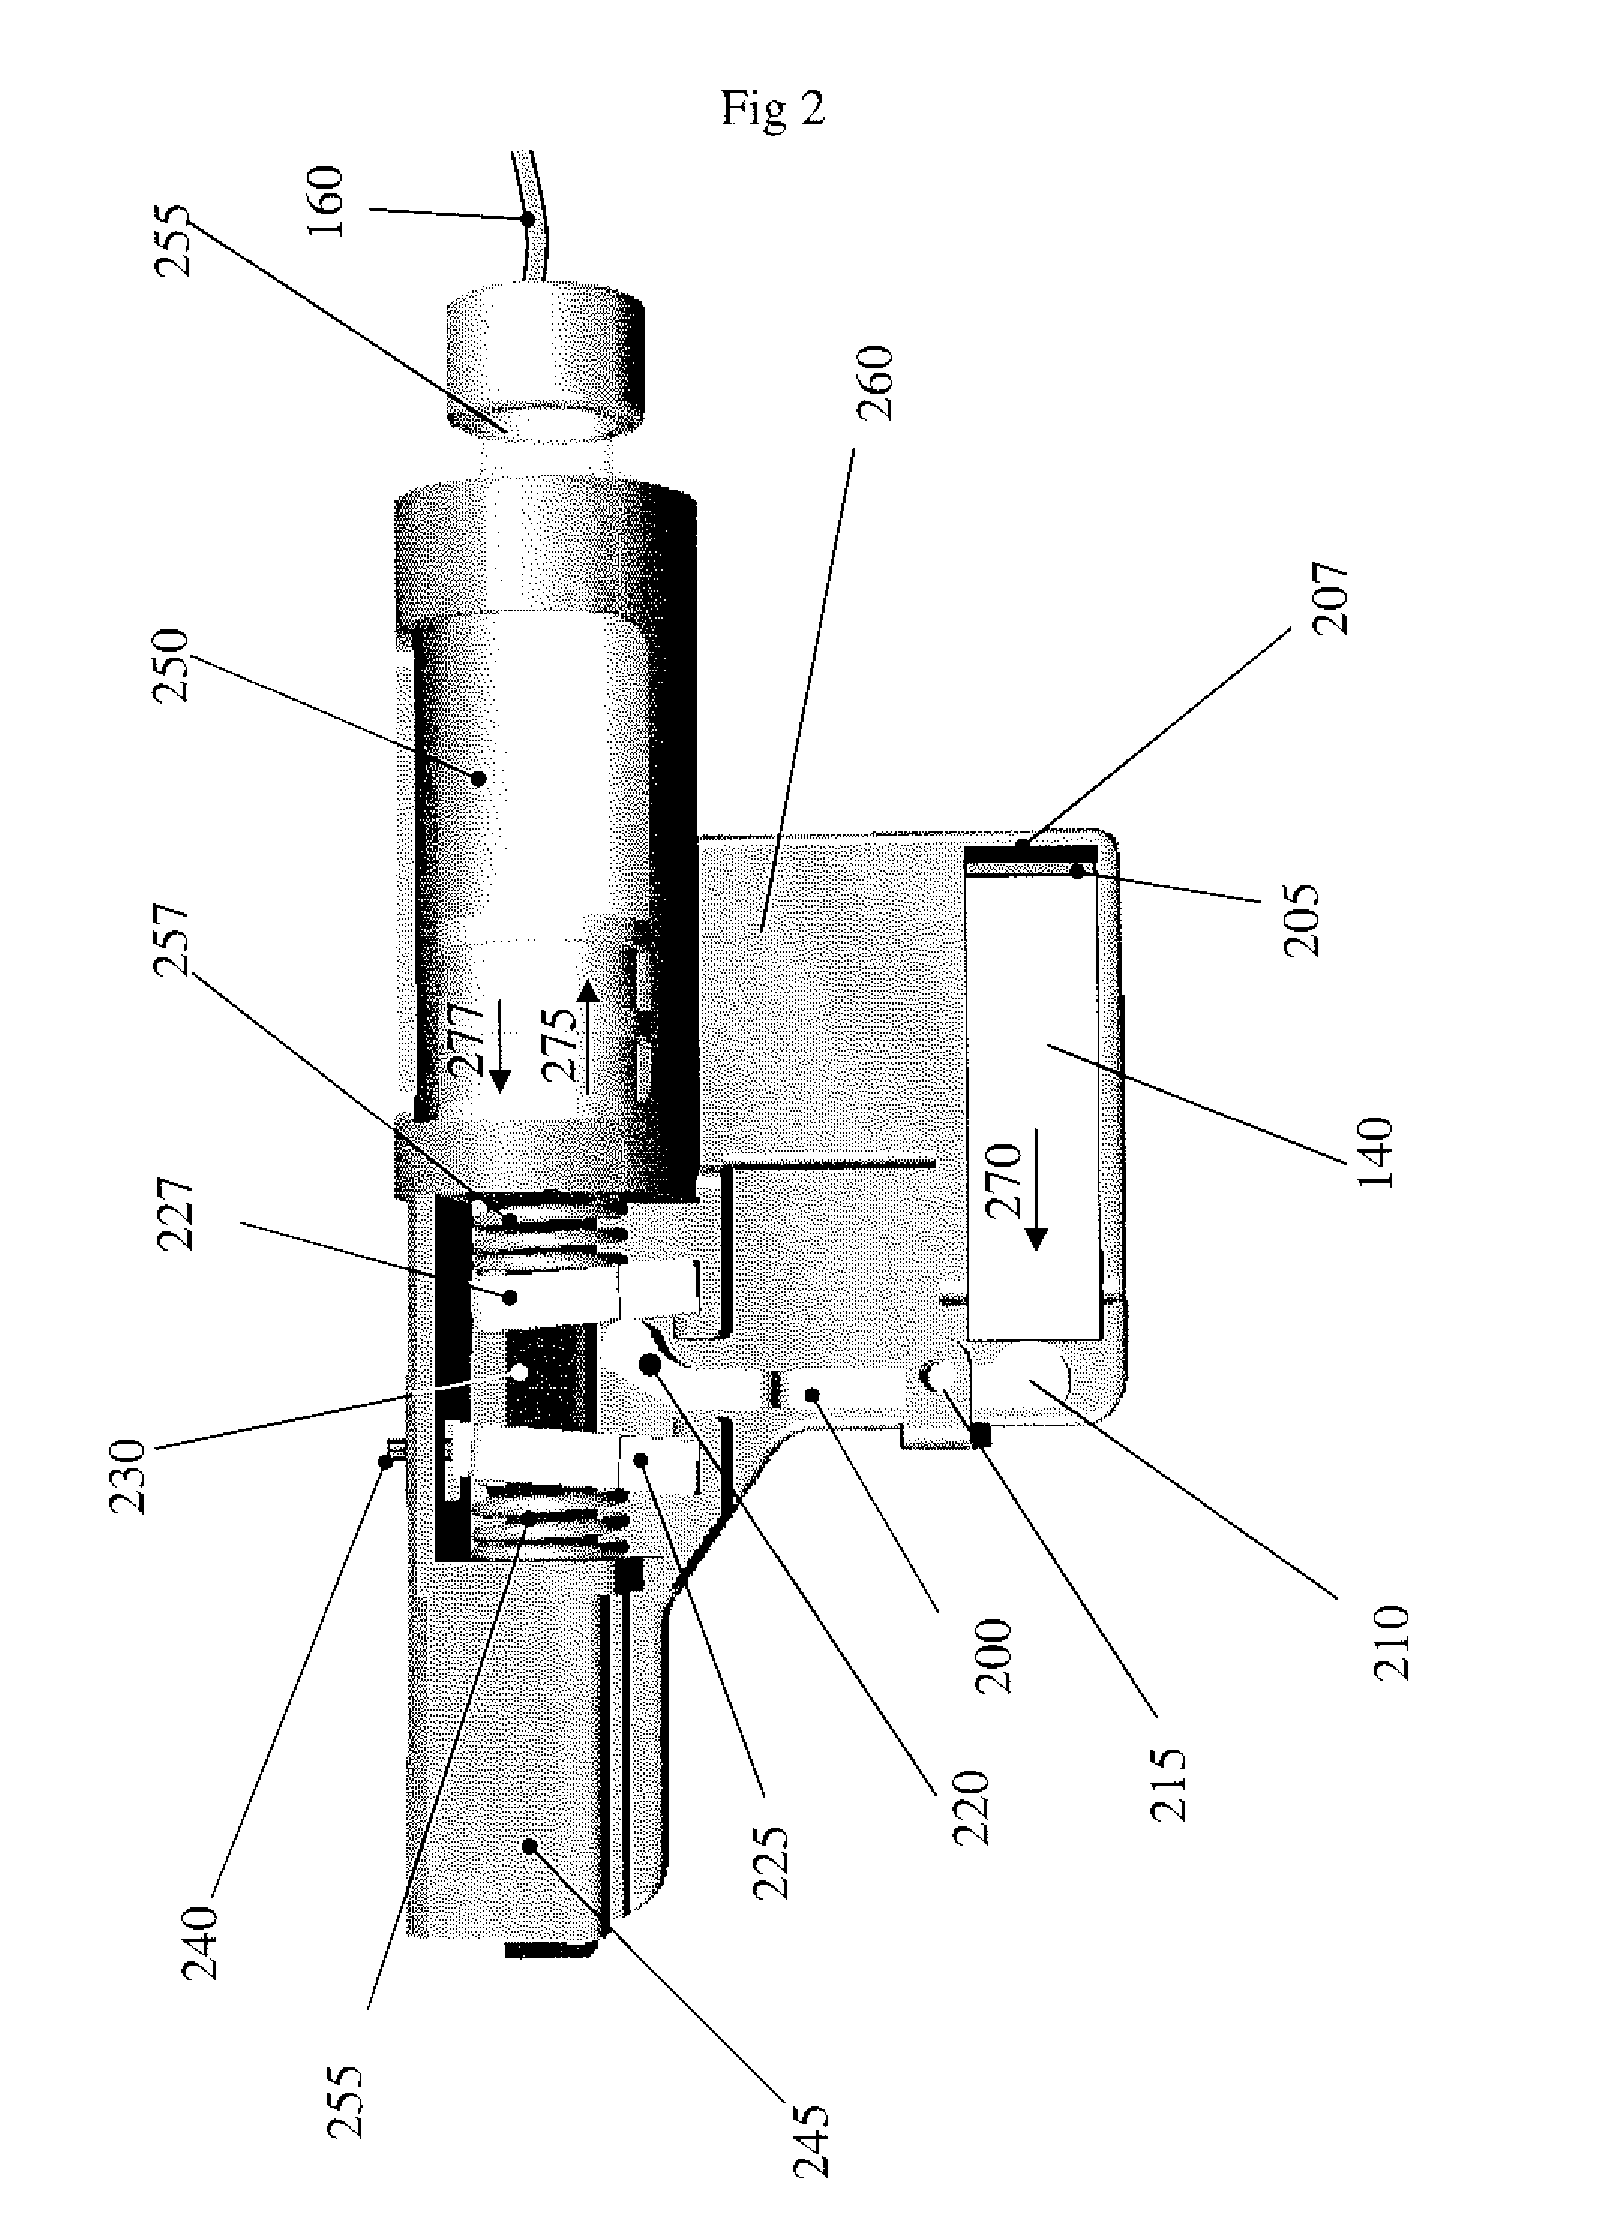 Miniature infusion pump for a controlled delivery of medication